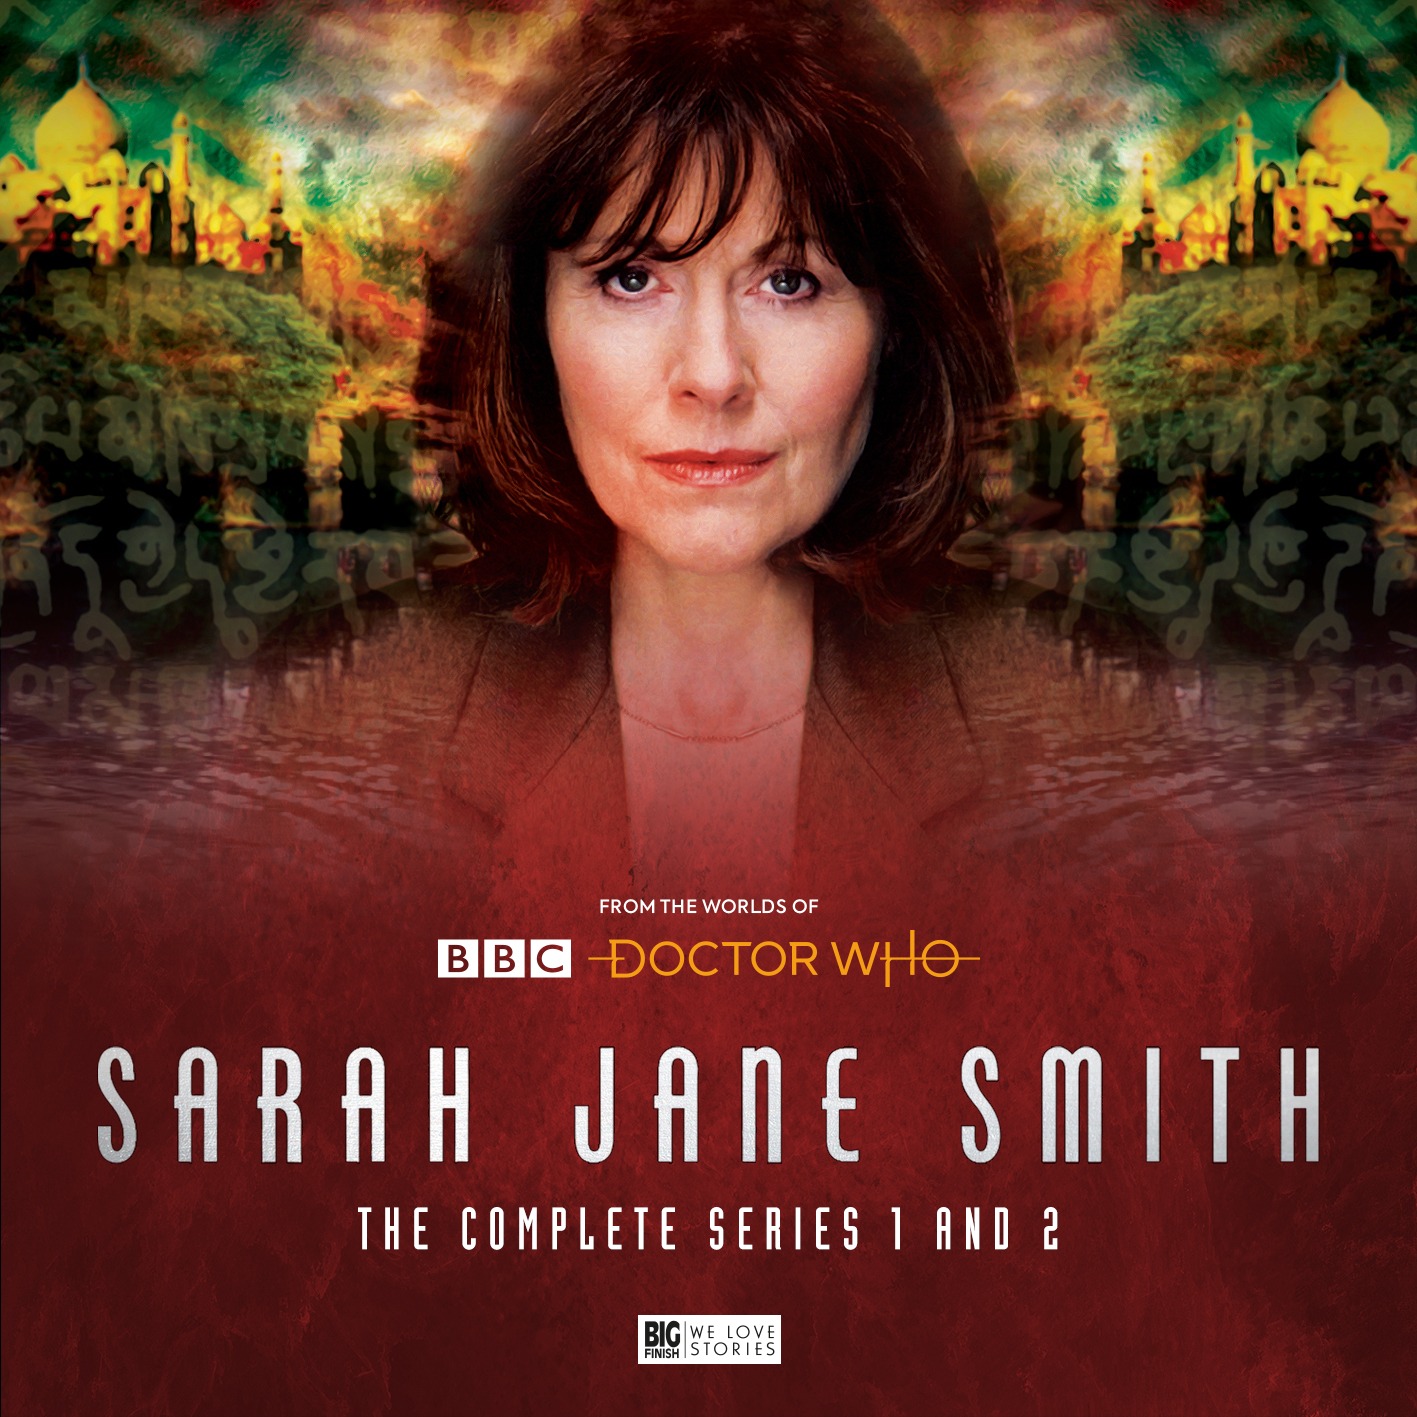 Sarah Jane Smith: The Complete Series 1 and 2